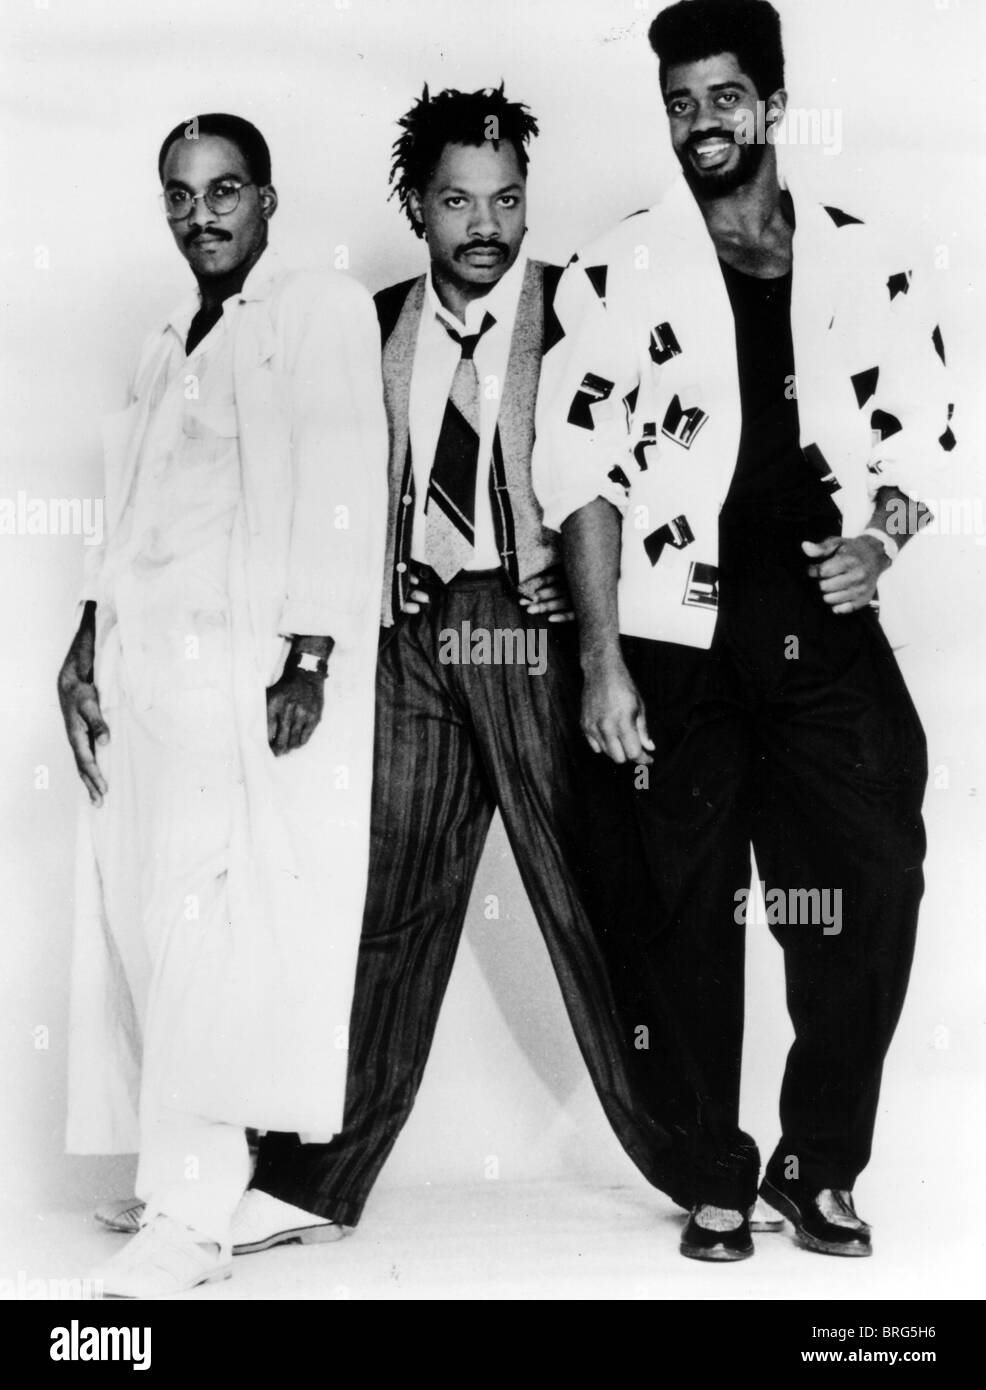 CAMEO  Promotional photo of US funk music group Stock Photo